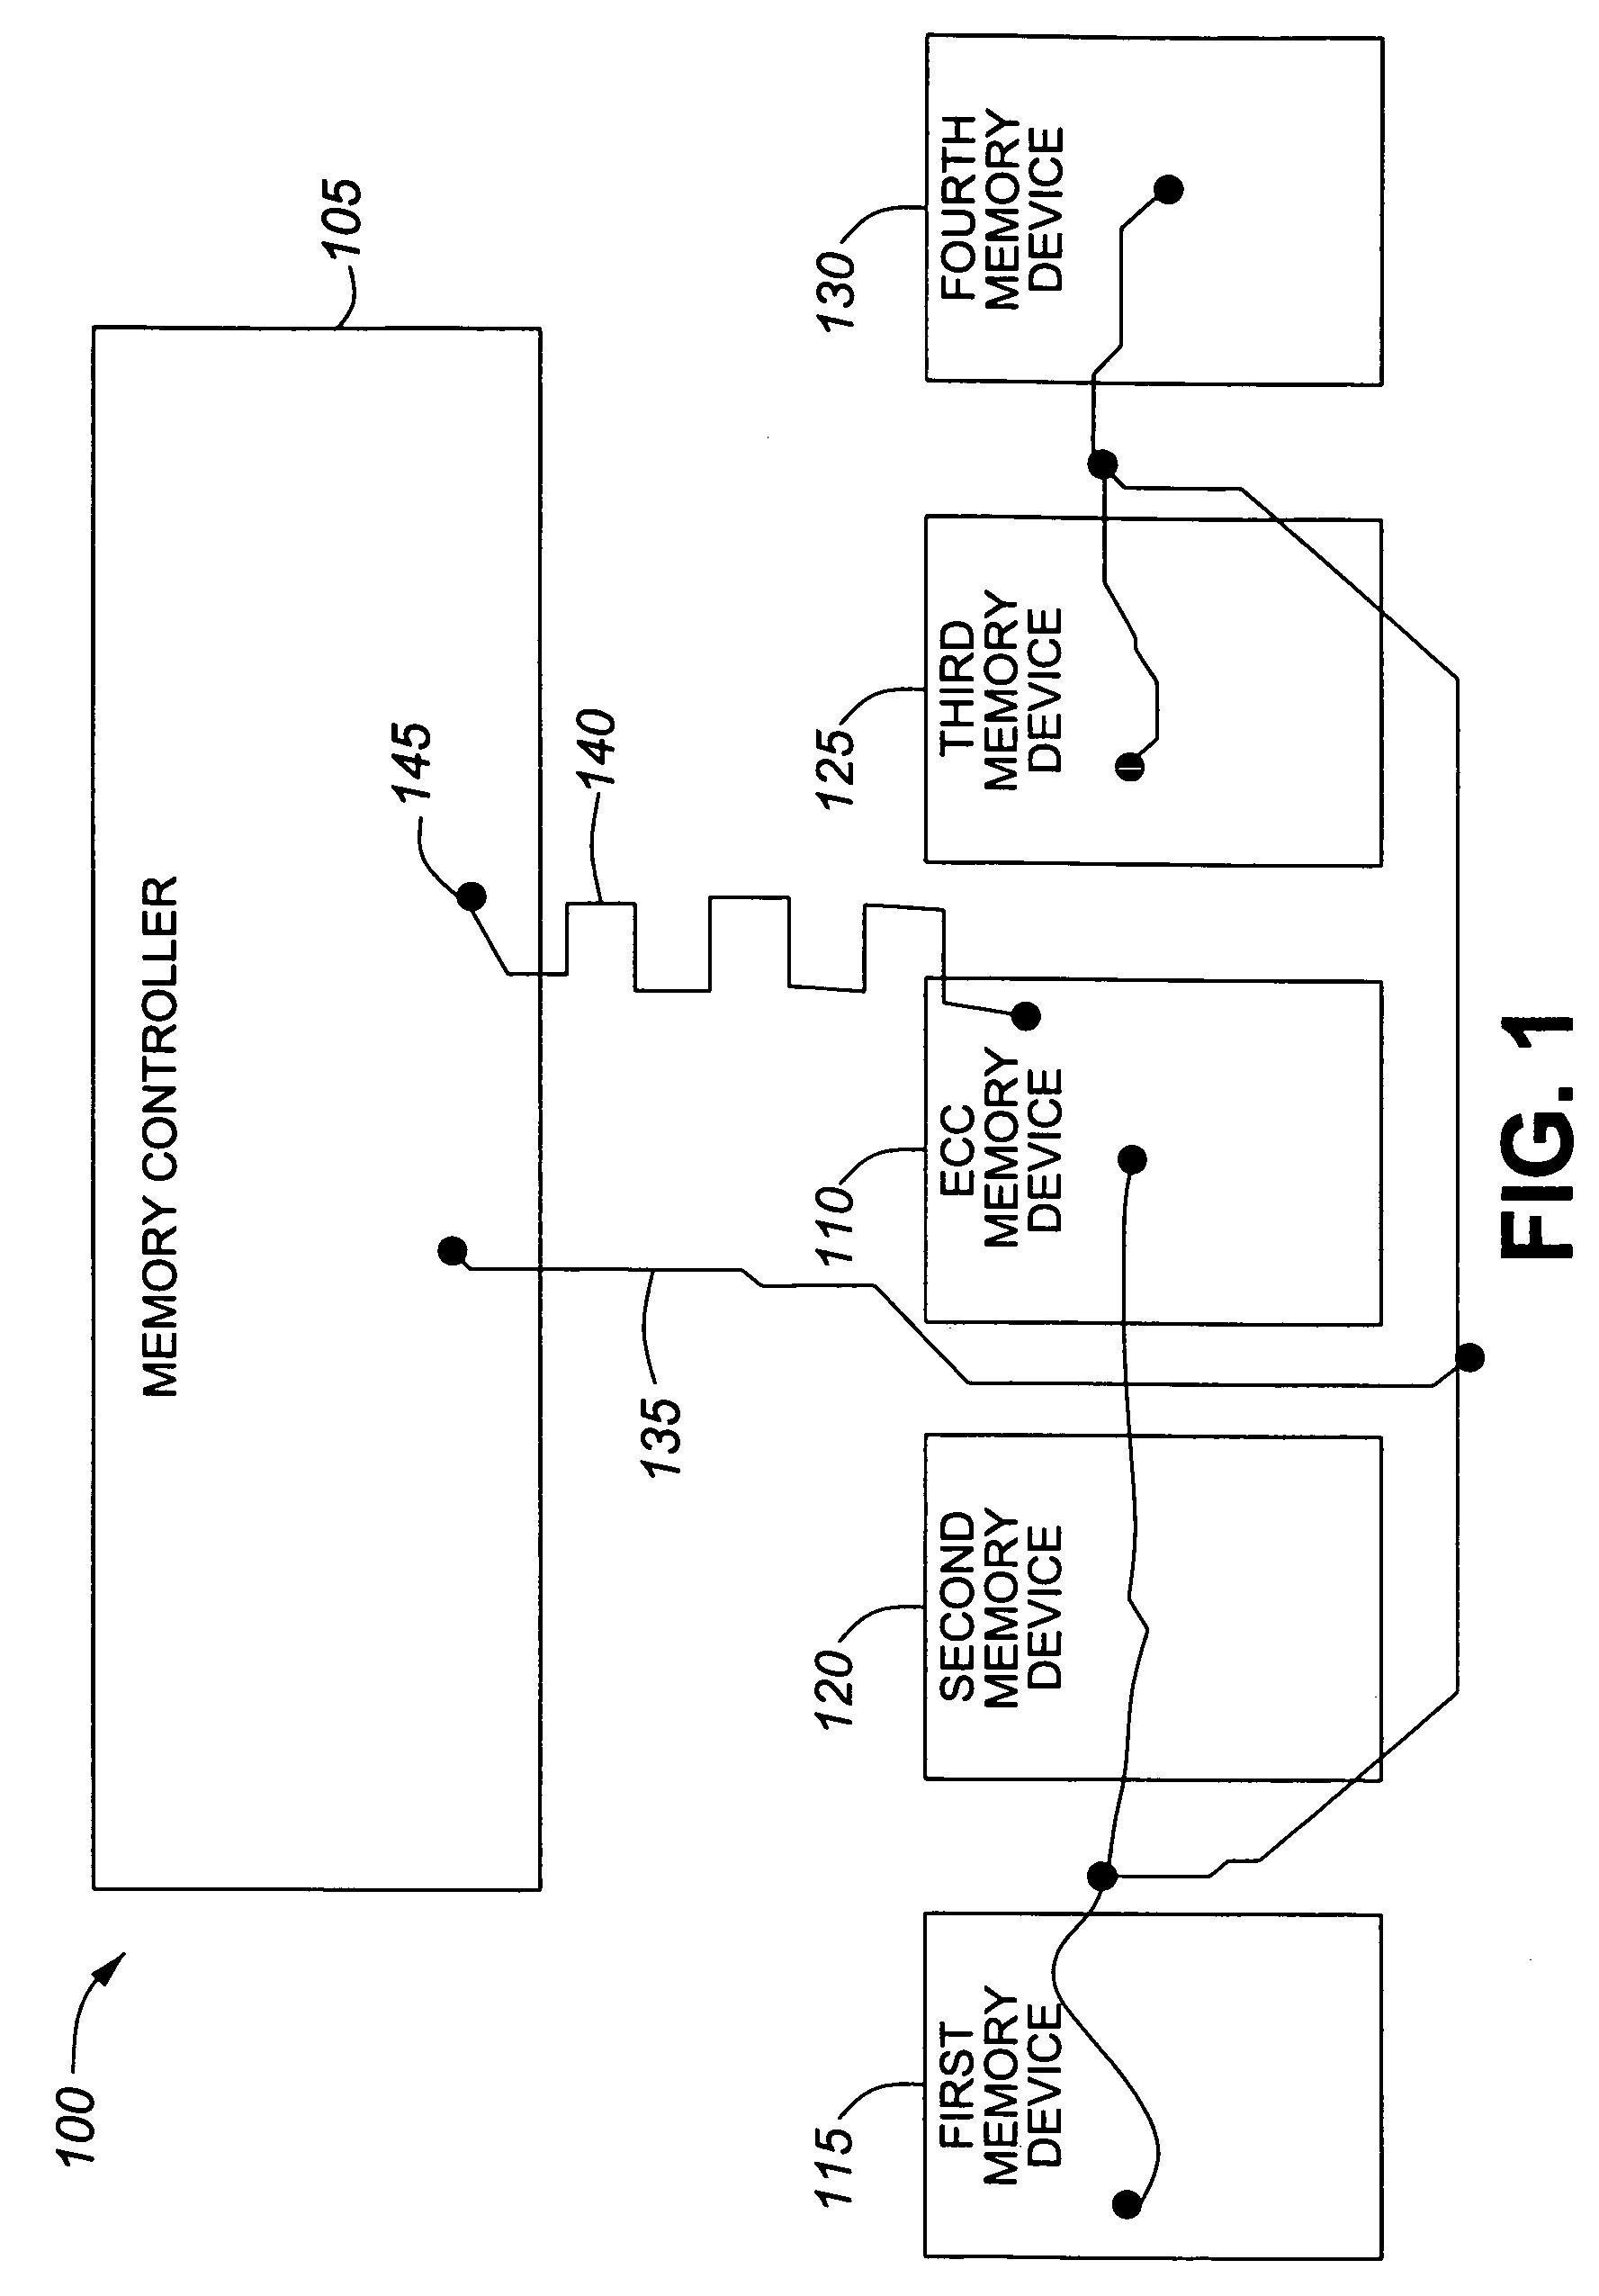 Placement and routing of ECC memory devices for improved signal timing